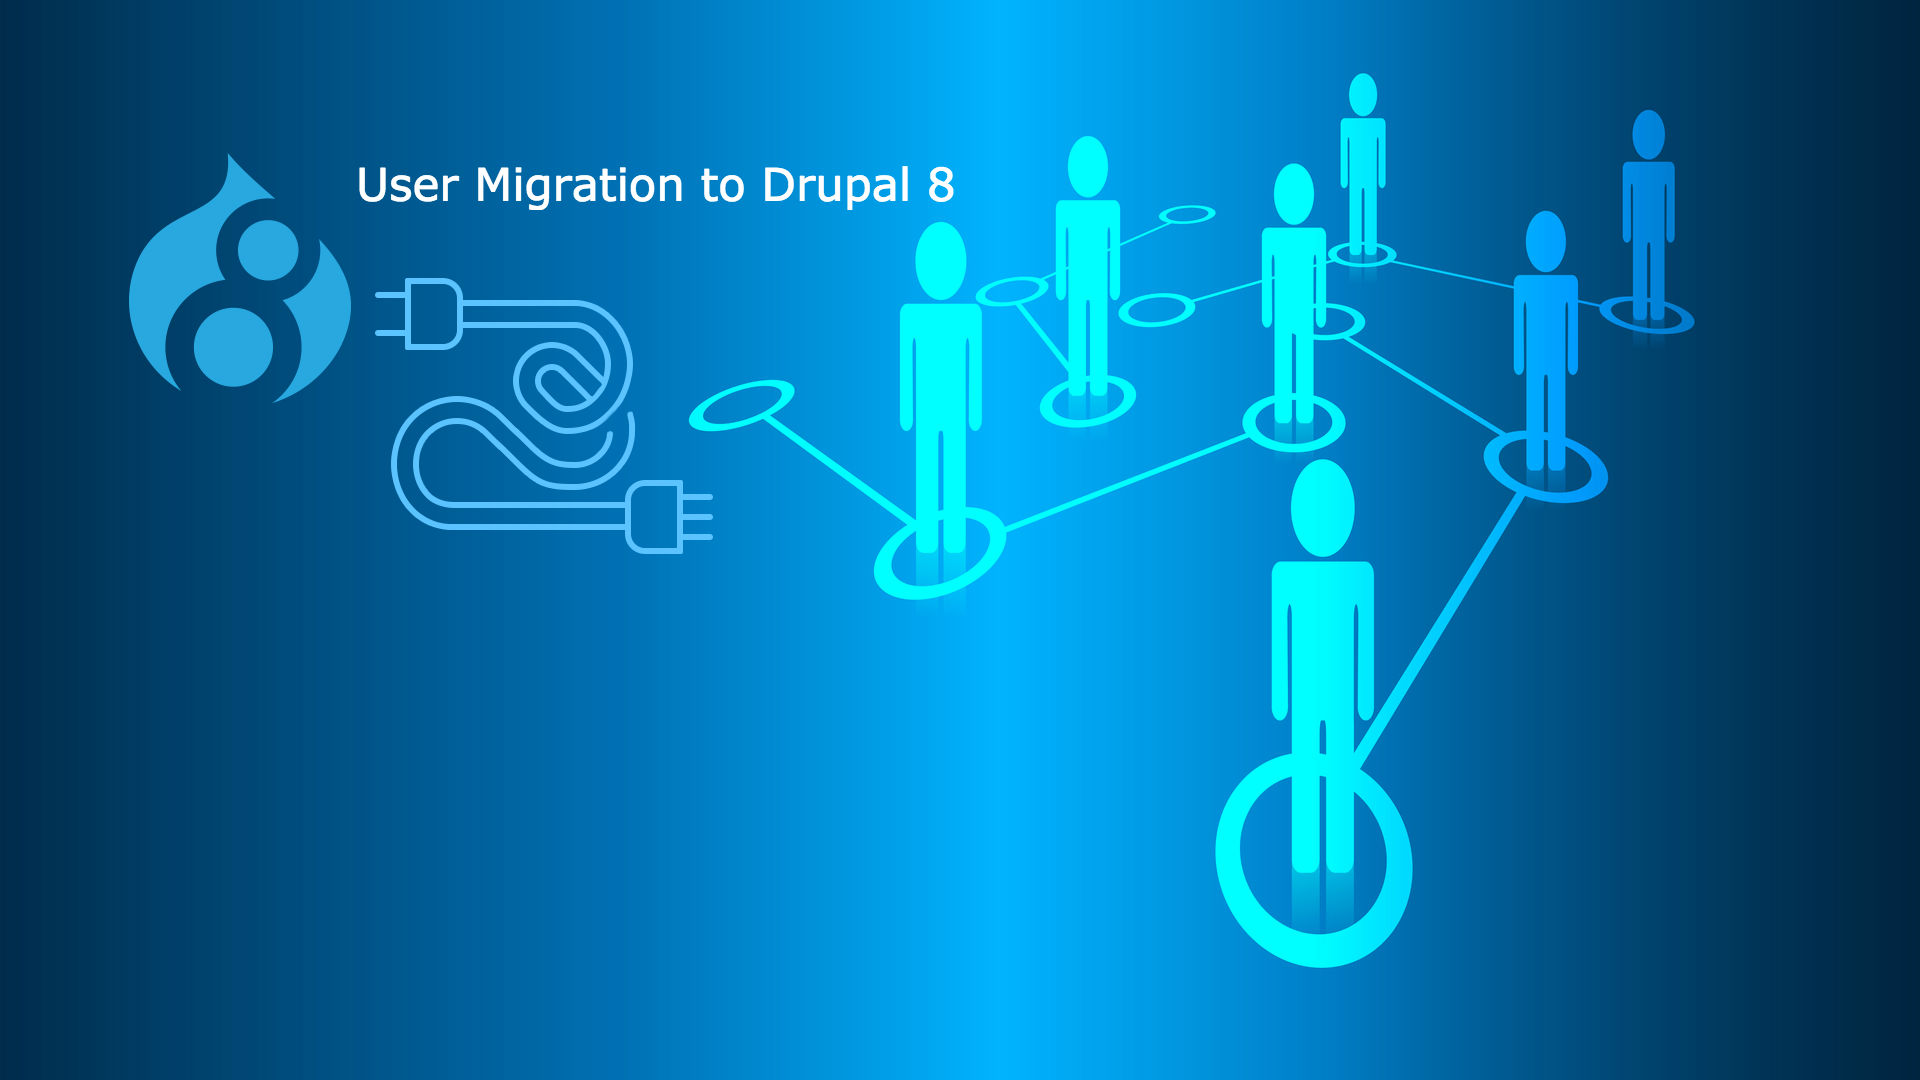 How to migrate Users from a CSV file in Drupal 8?